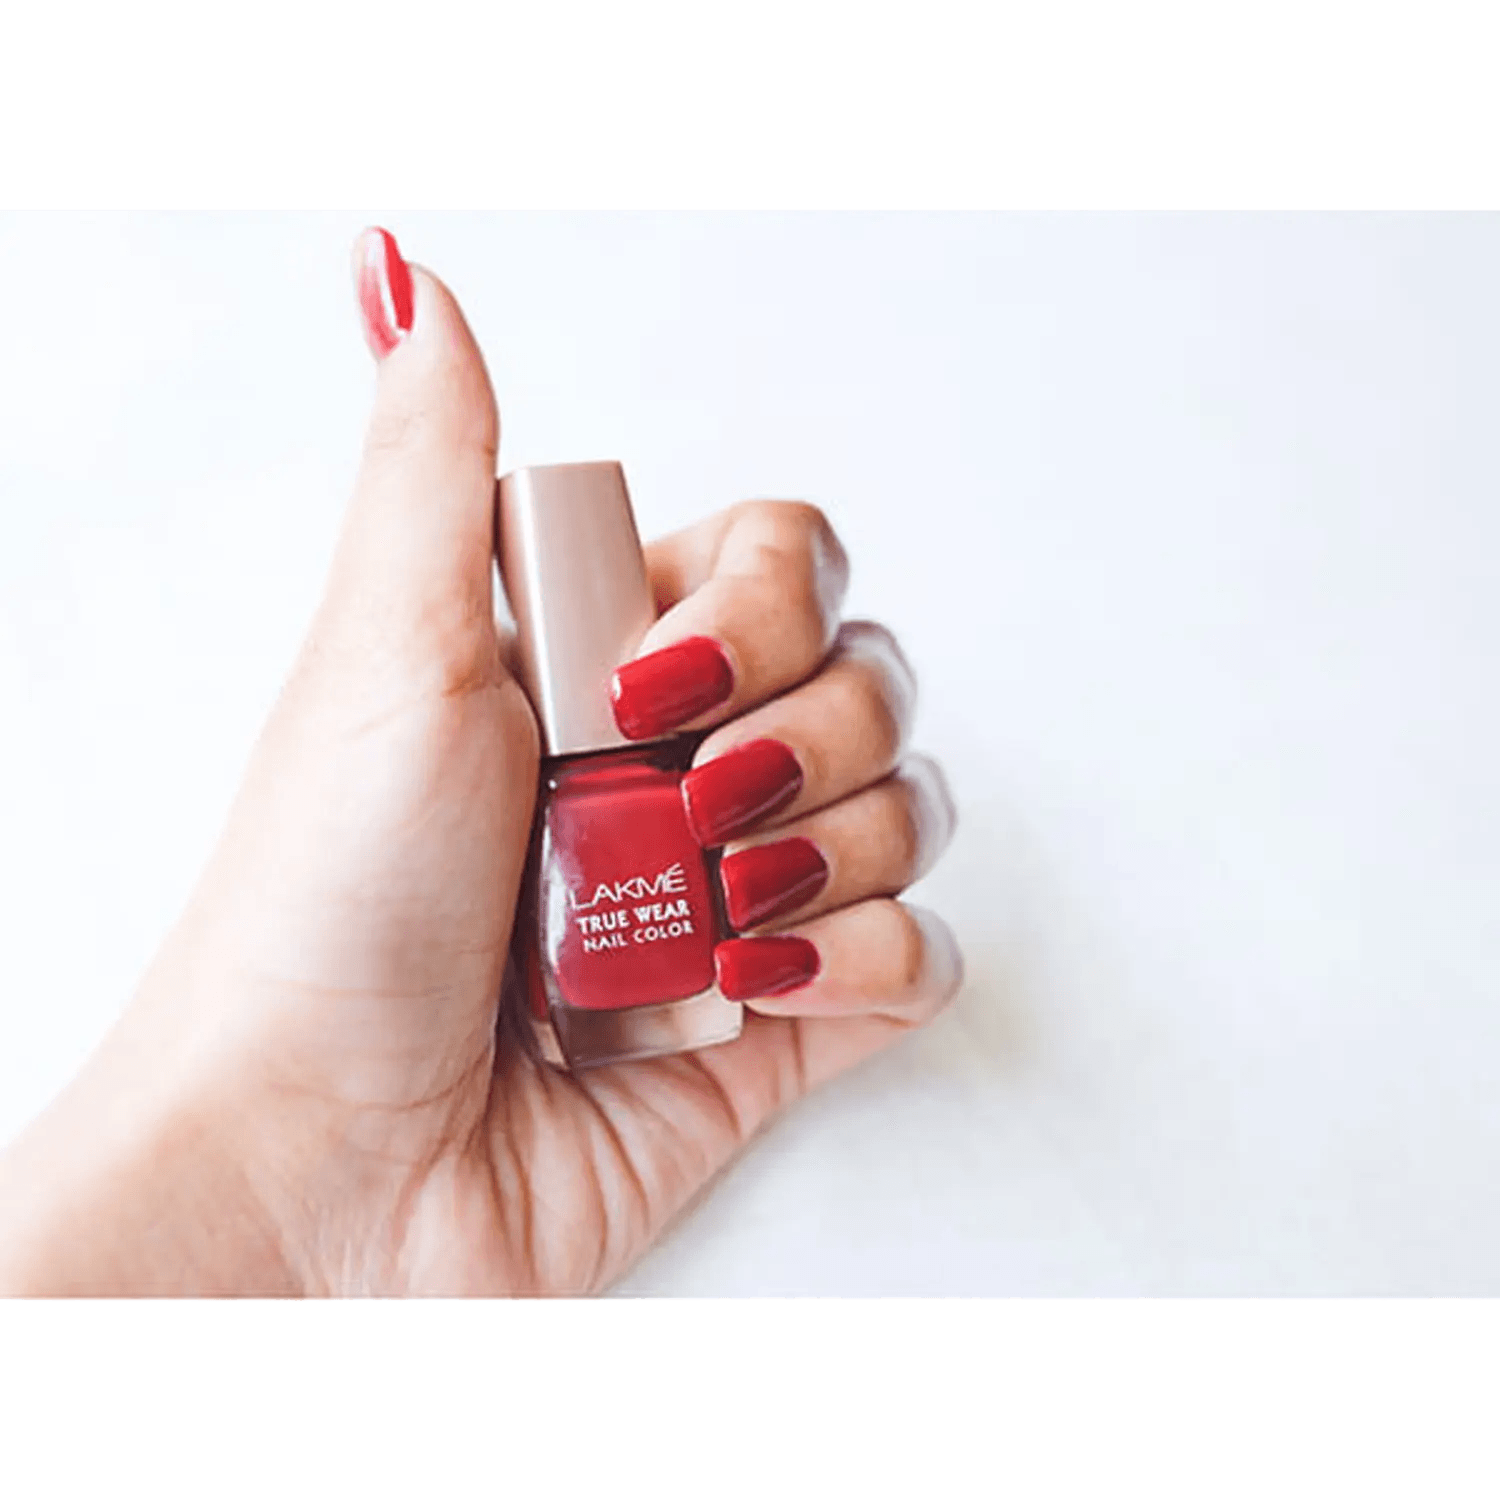 Buy Lakme True Wear Color Crush Nail Color, Pink 21, 9ml & Lakme True Wear  Color Crush Nail Color, Reds 31, 9 ml Online at Low Prices in India -  Amazon.in